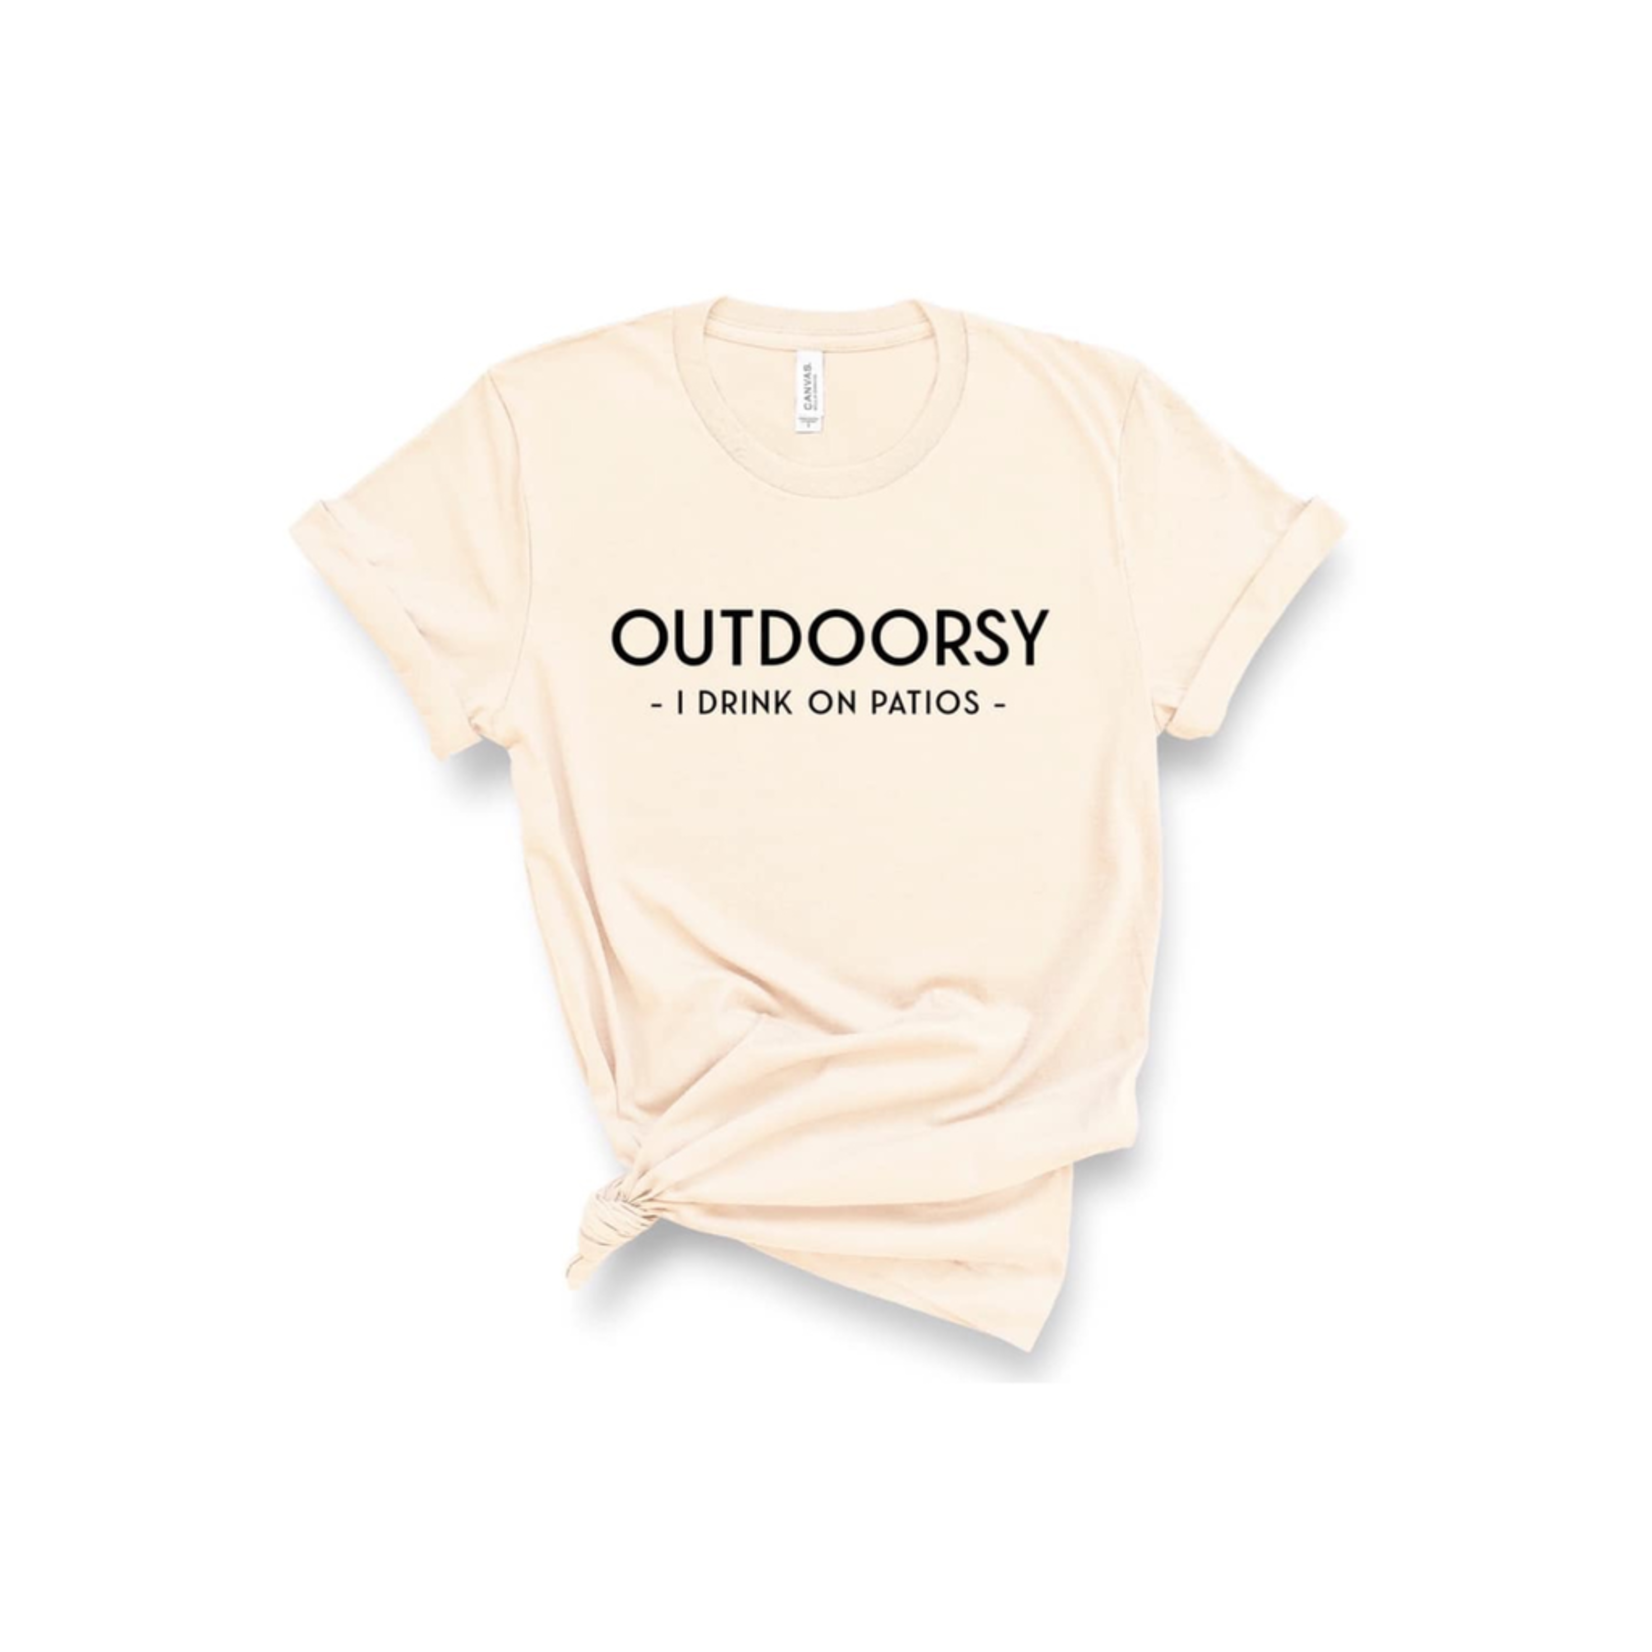 Type A Tees Outdoorsy Tee, sale item, was $24